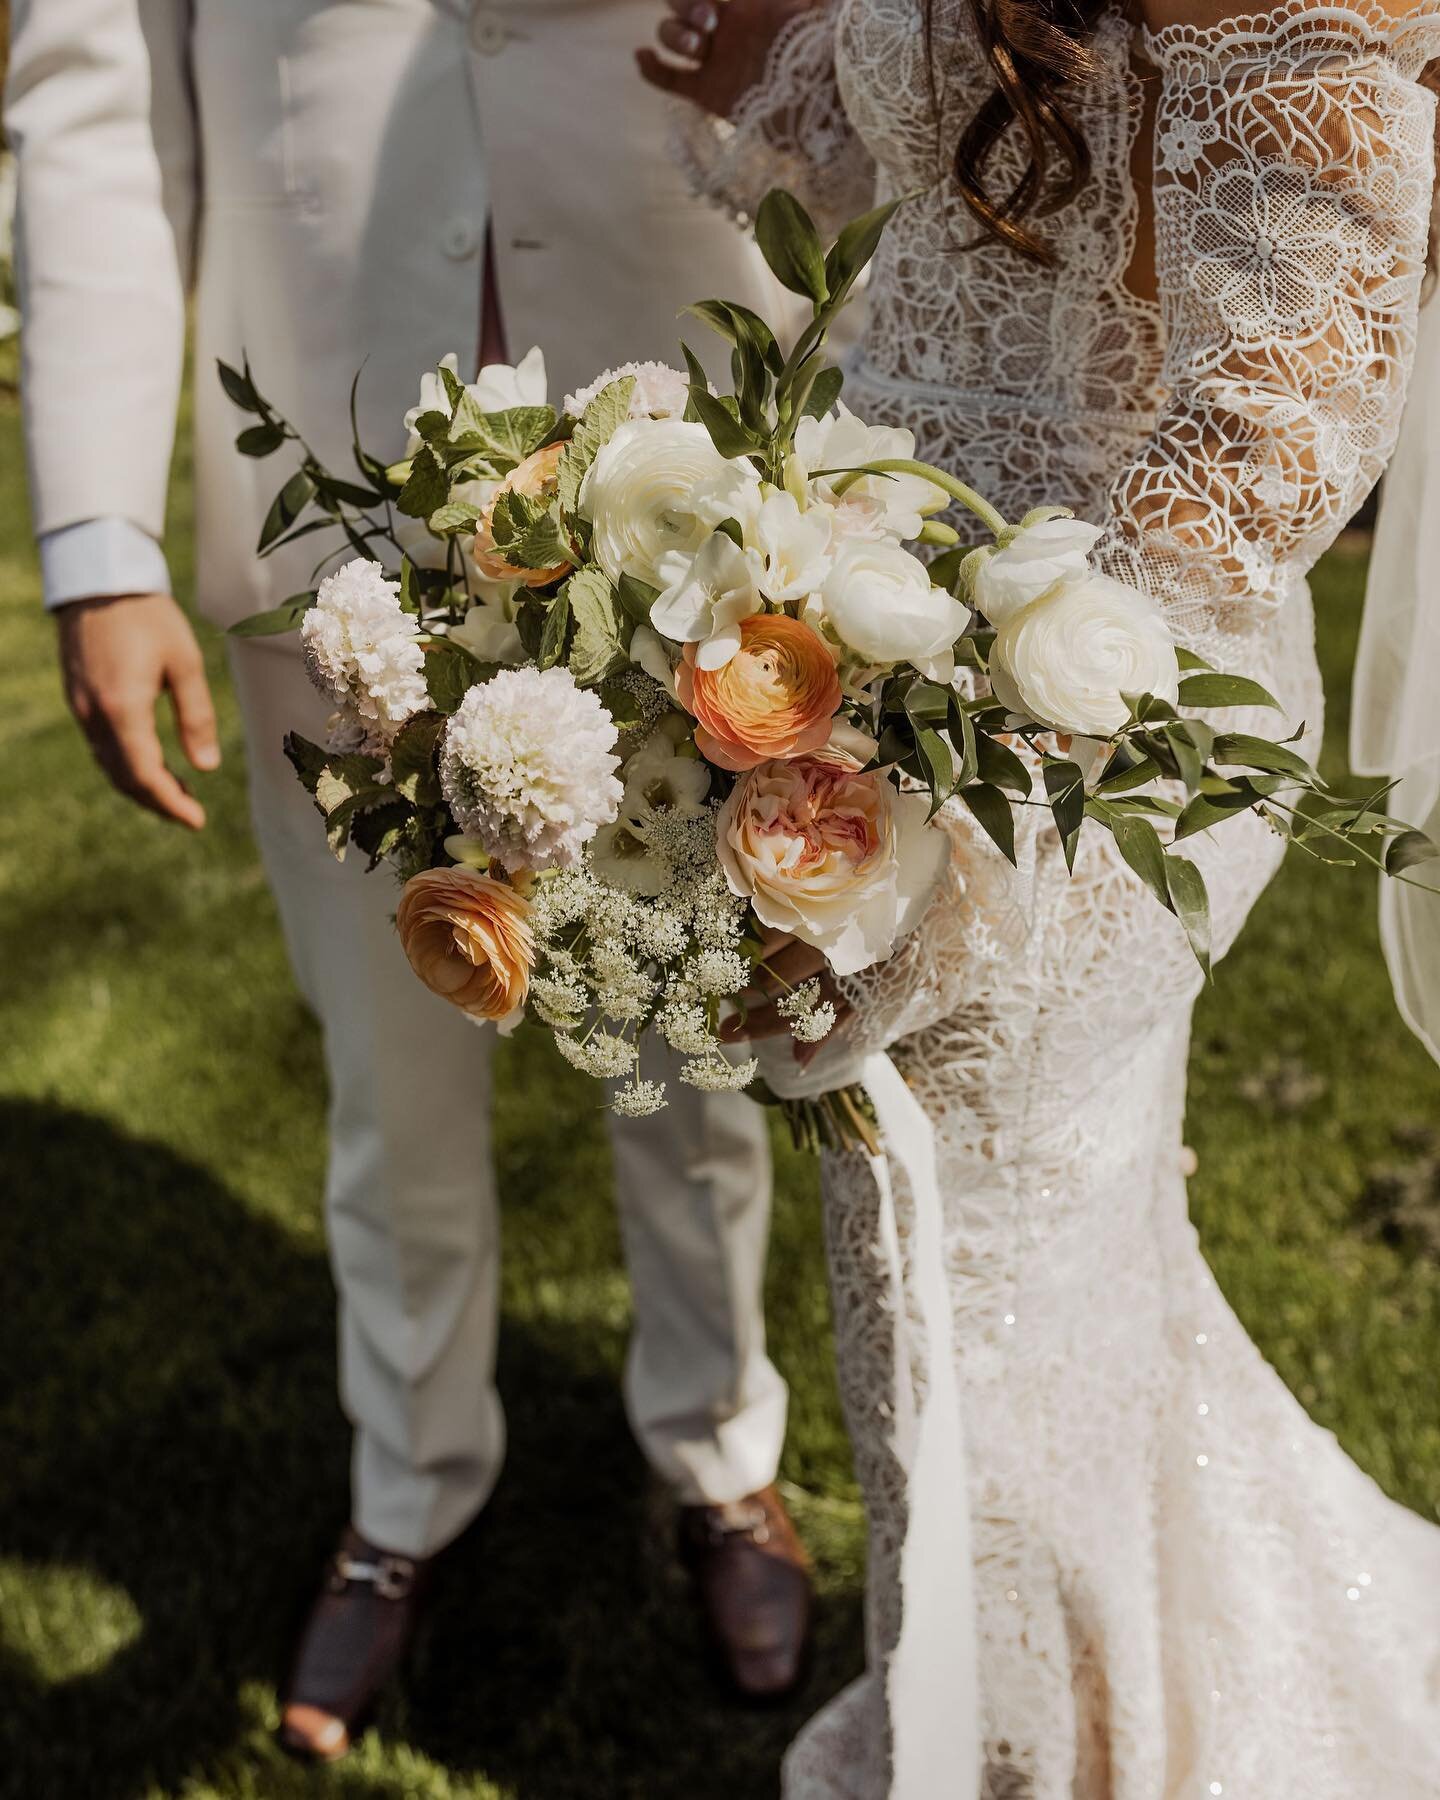 A moment for her bouquet ✨ Absolutely love the delicate springtime vibes from these florals. 

Captured so beautifully by  @ezer_photo 💕 
Coordinator:@threetreeweddings 
Florist: @threetreeweddings 
Photographer: @ezer_photo 
Videographer: @_dianaga